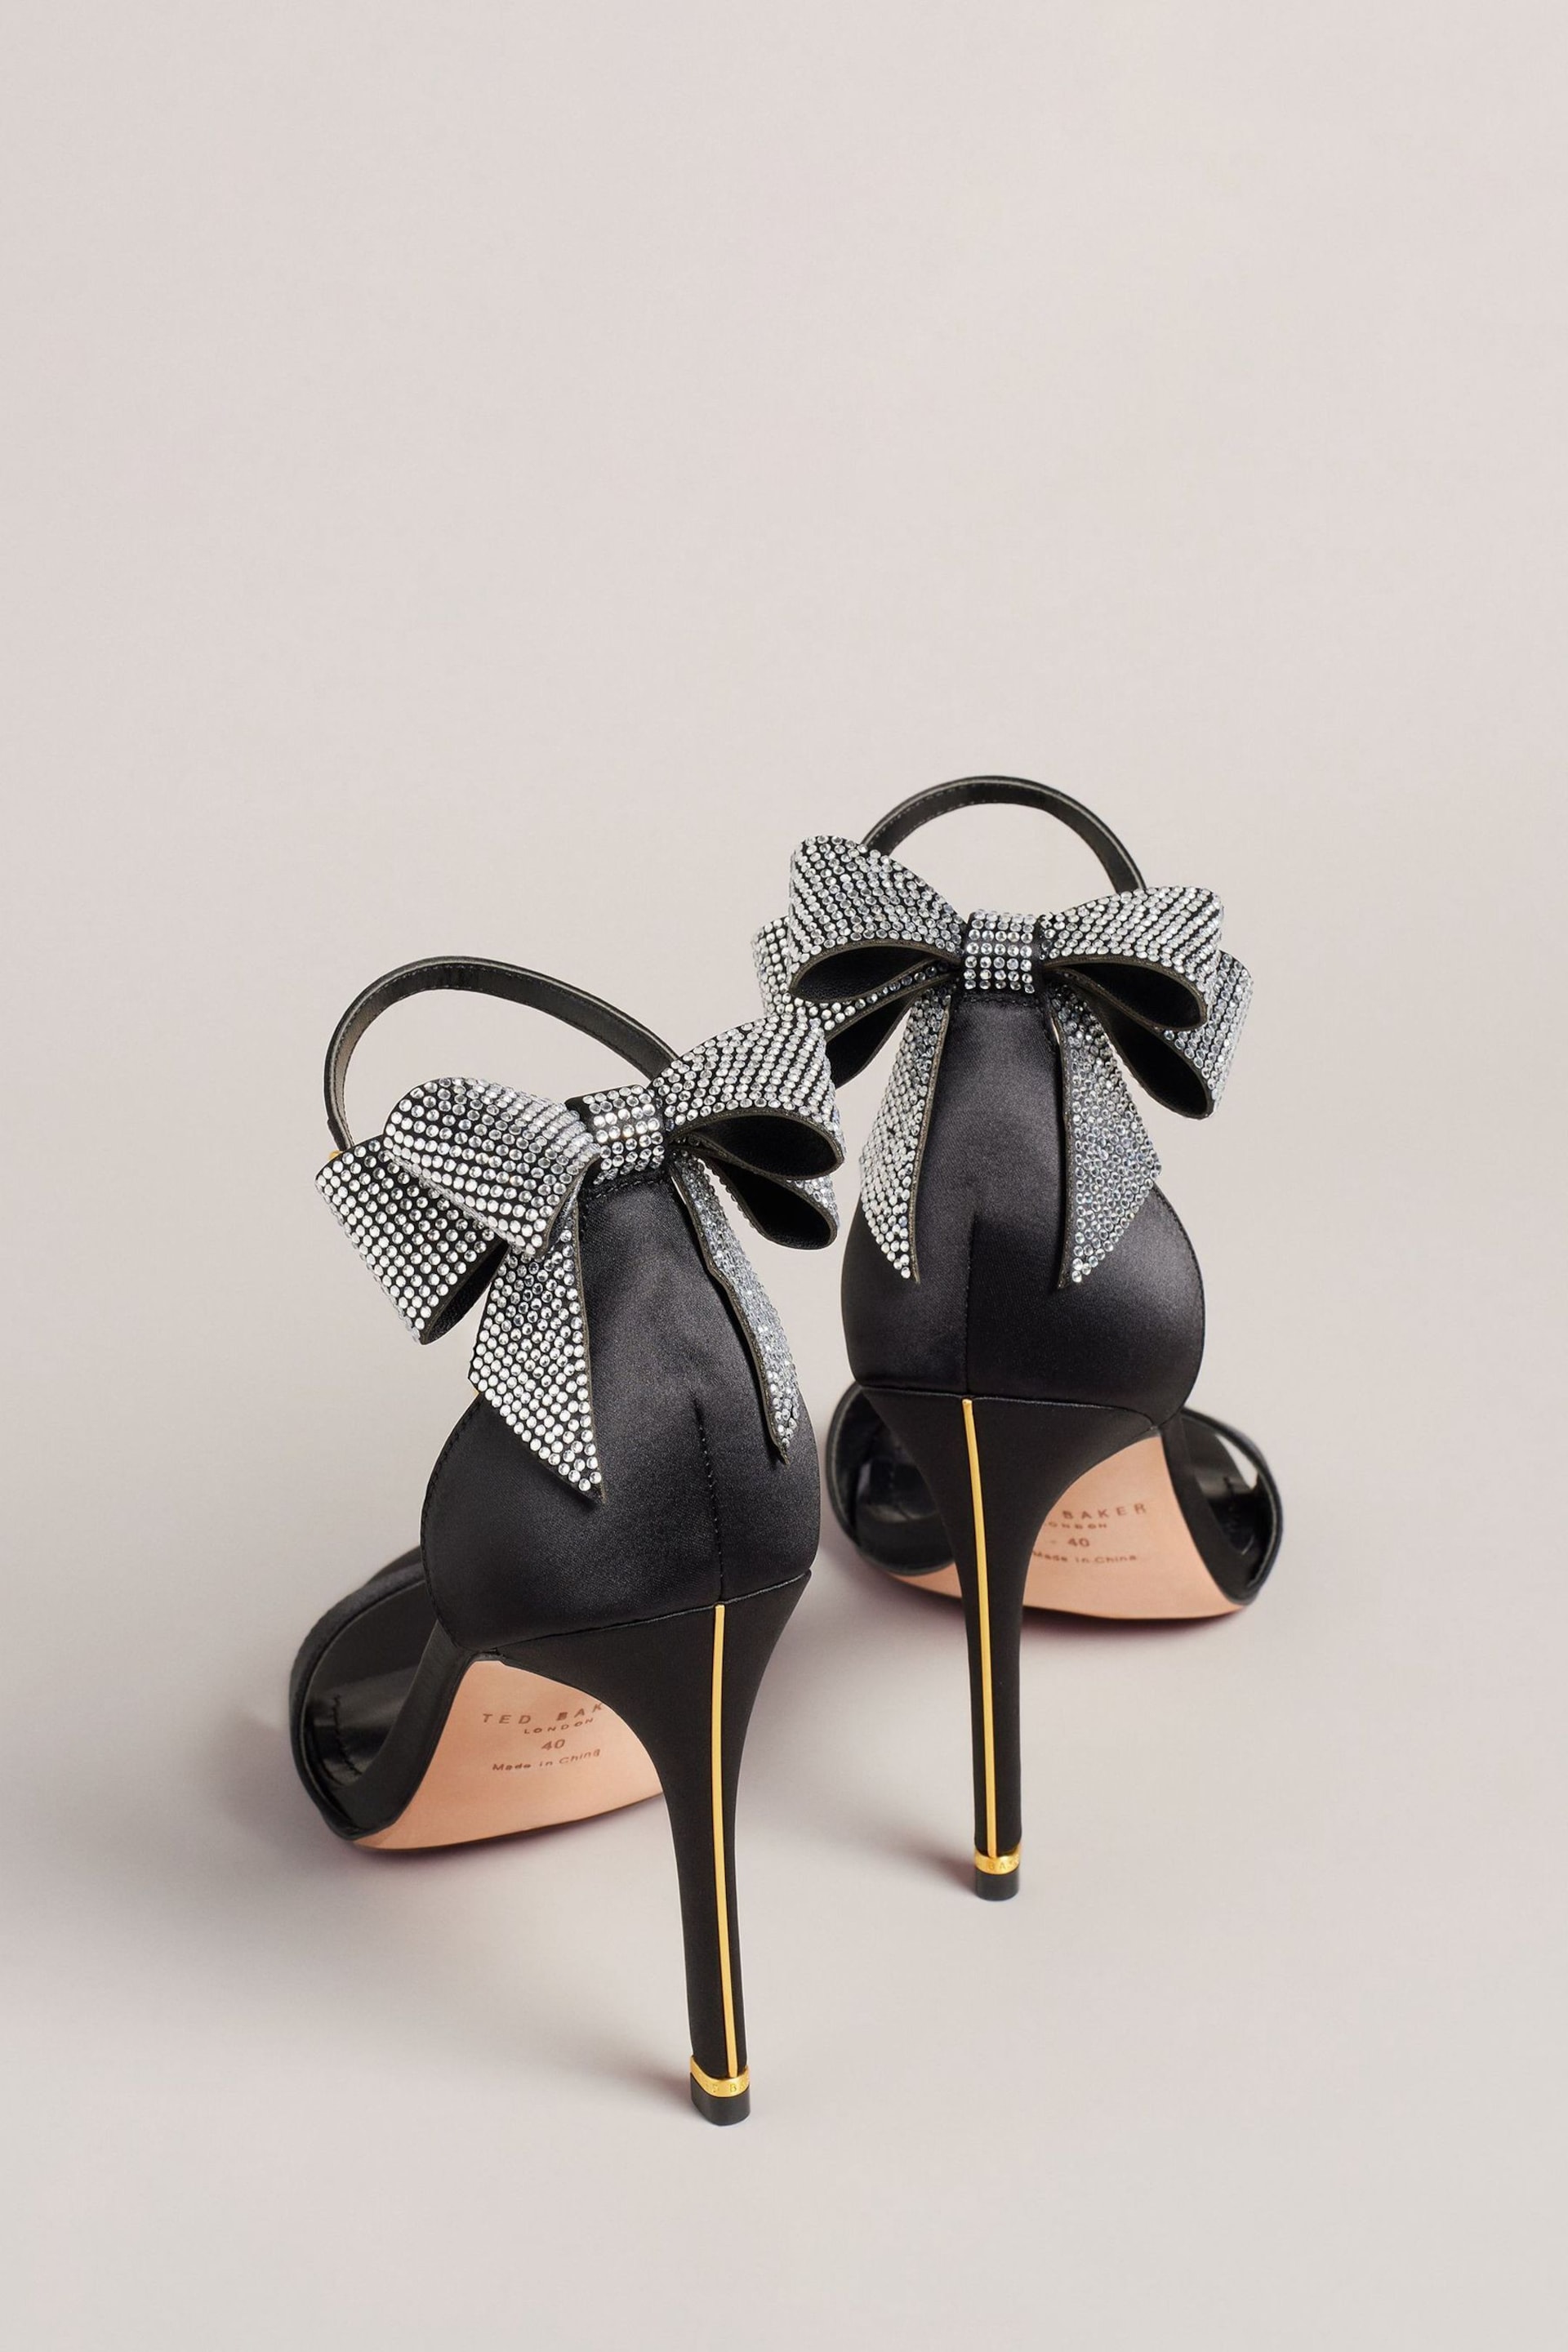 Ted Baker Black Hemary Satin Crystal Bow Back Sandals - Image 3 of 5